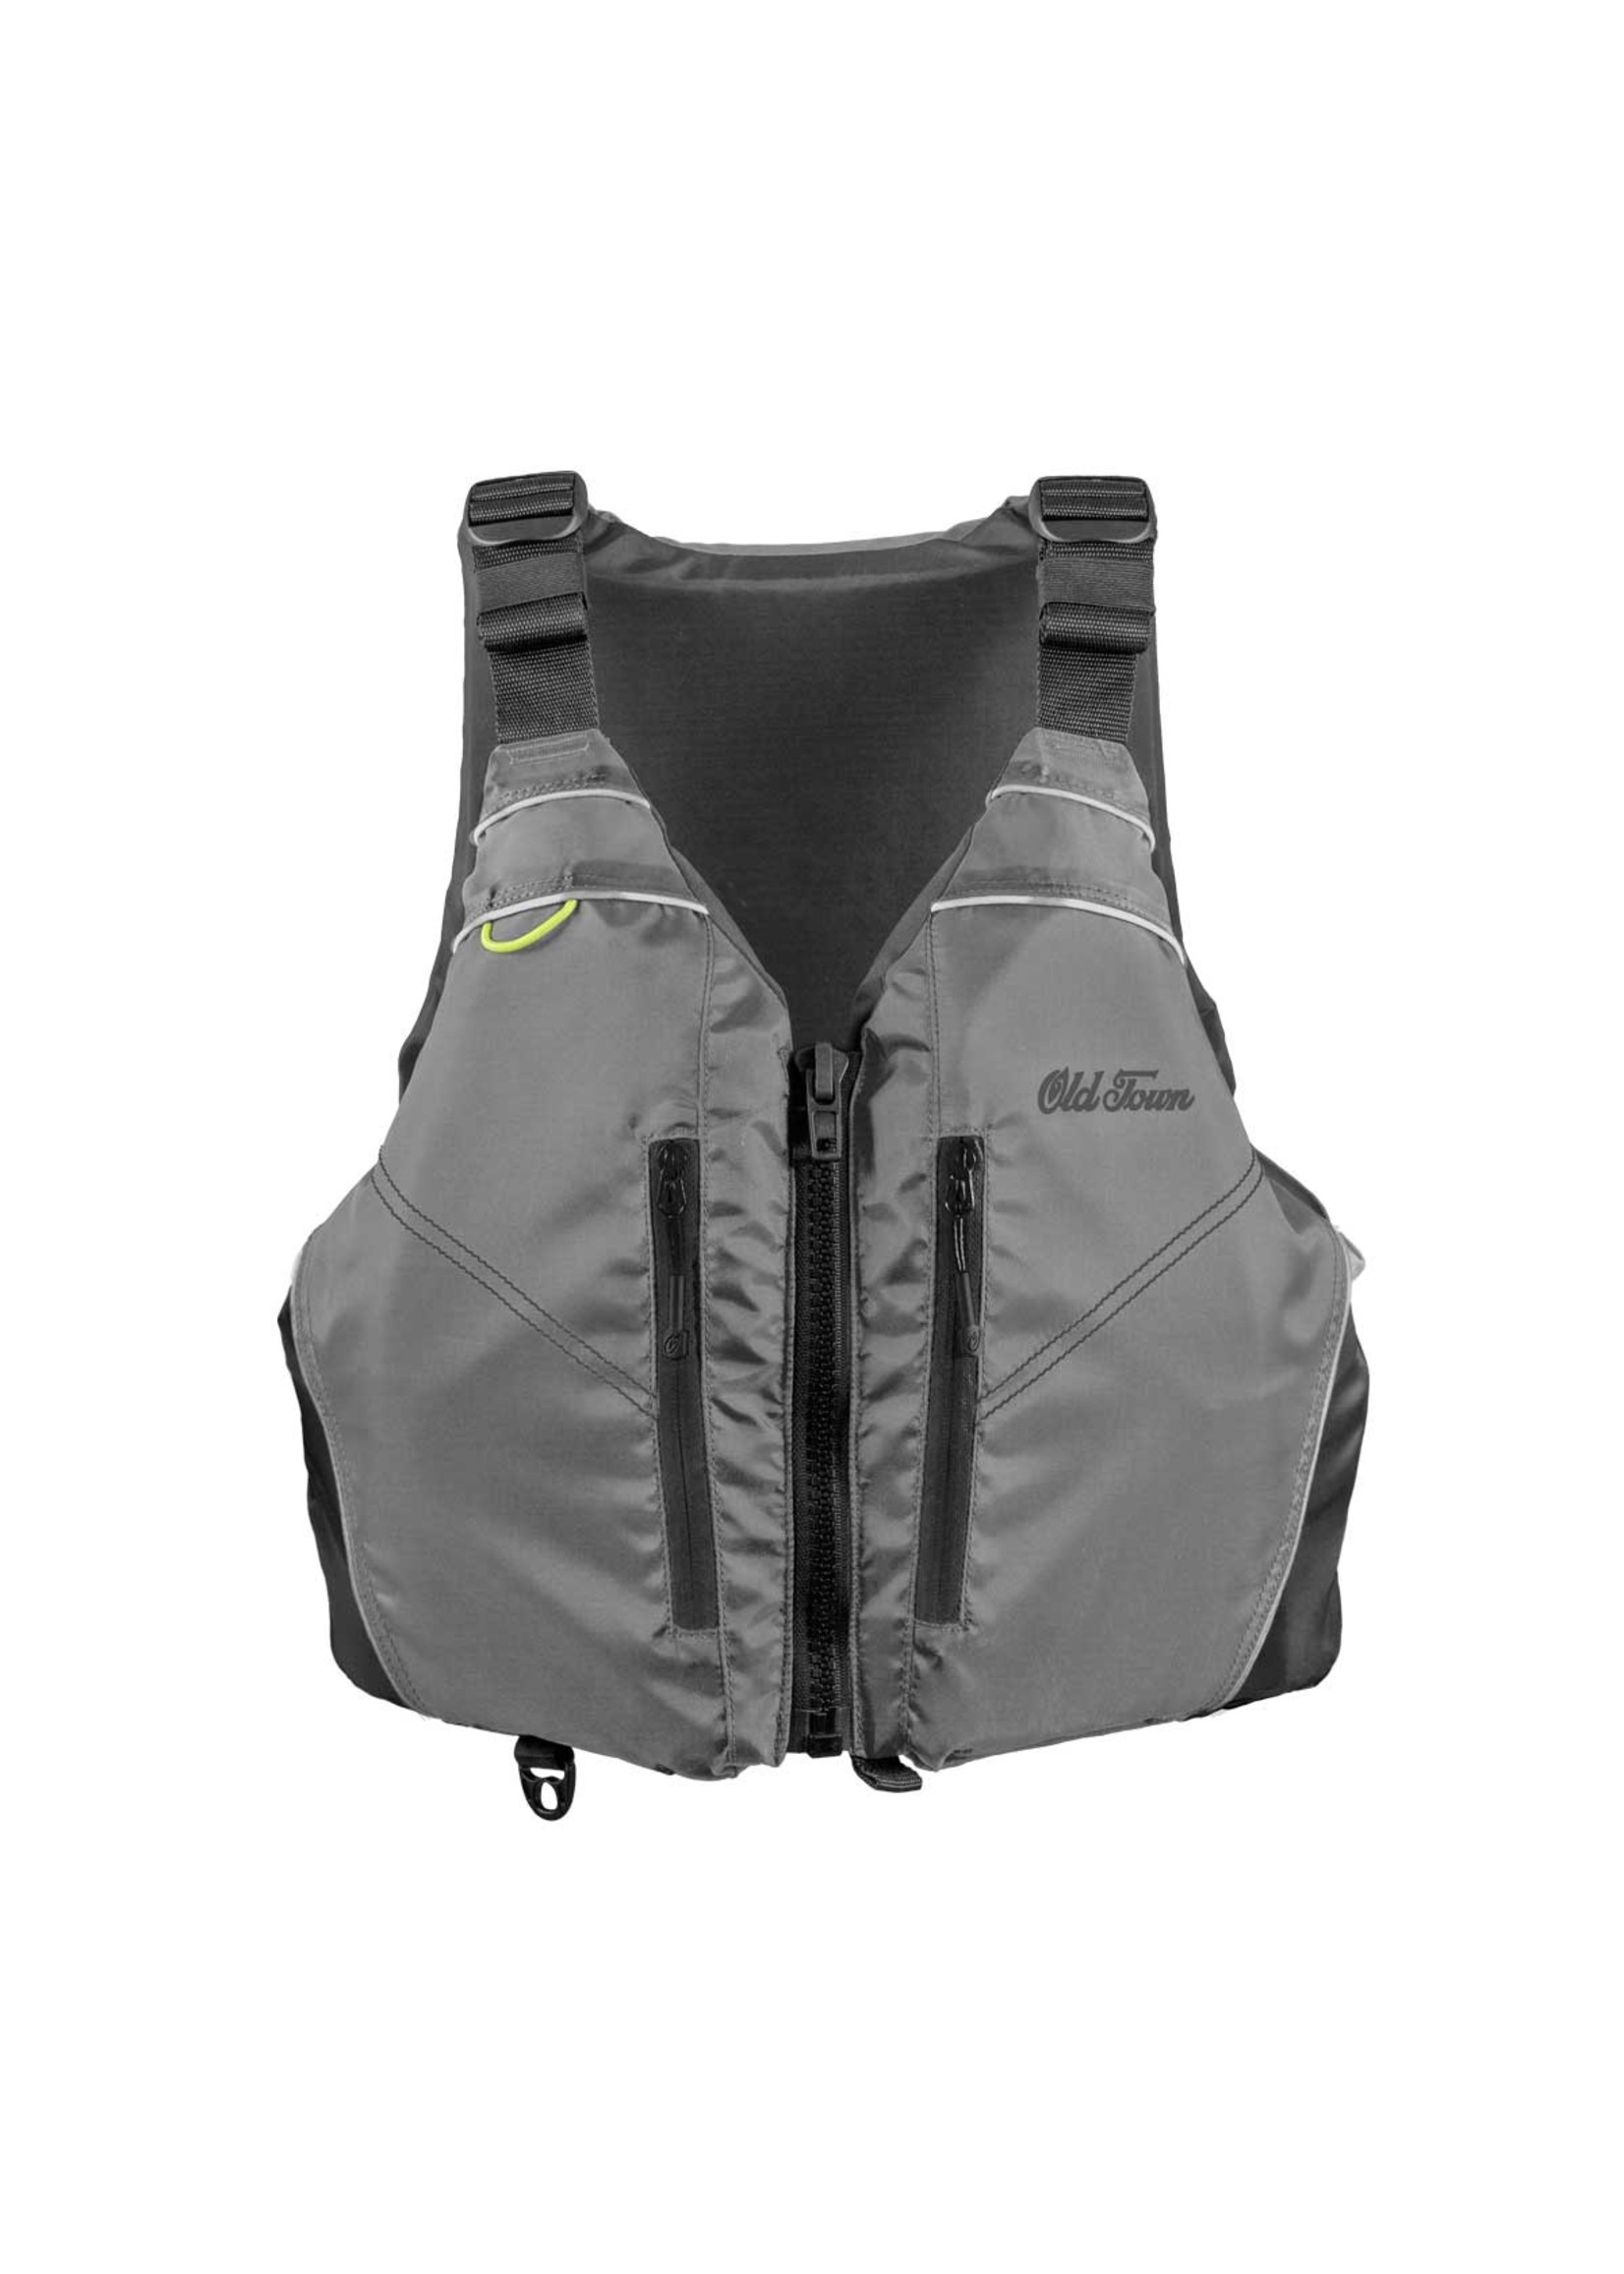 Old Town Old Town Riverstream Universal Adult PFD